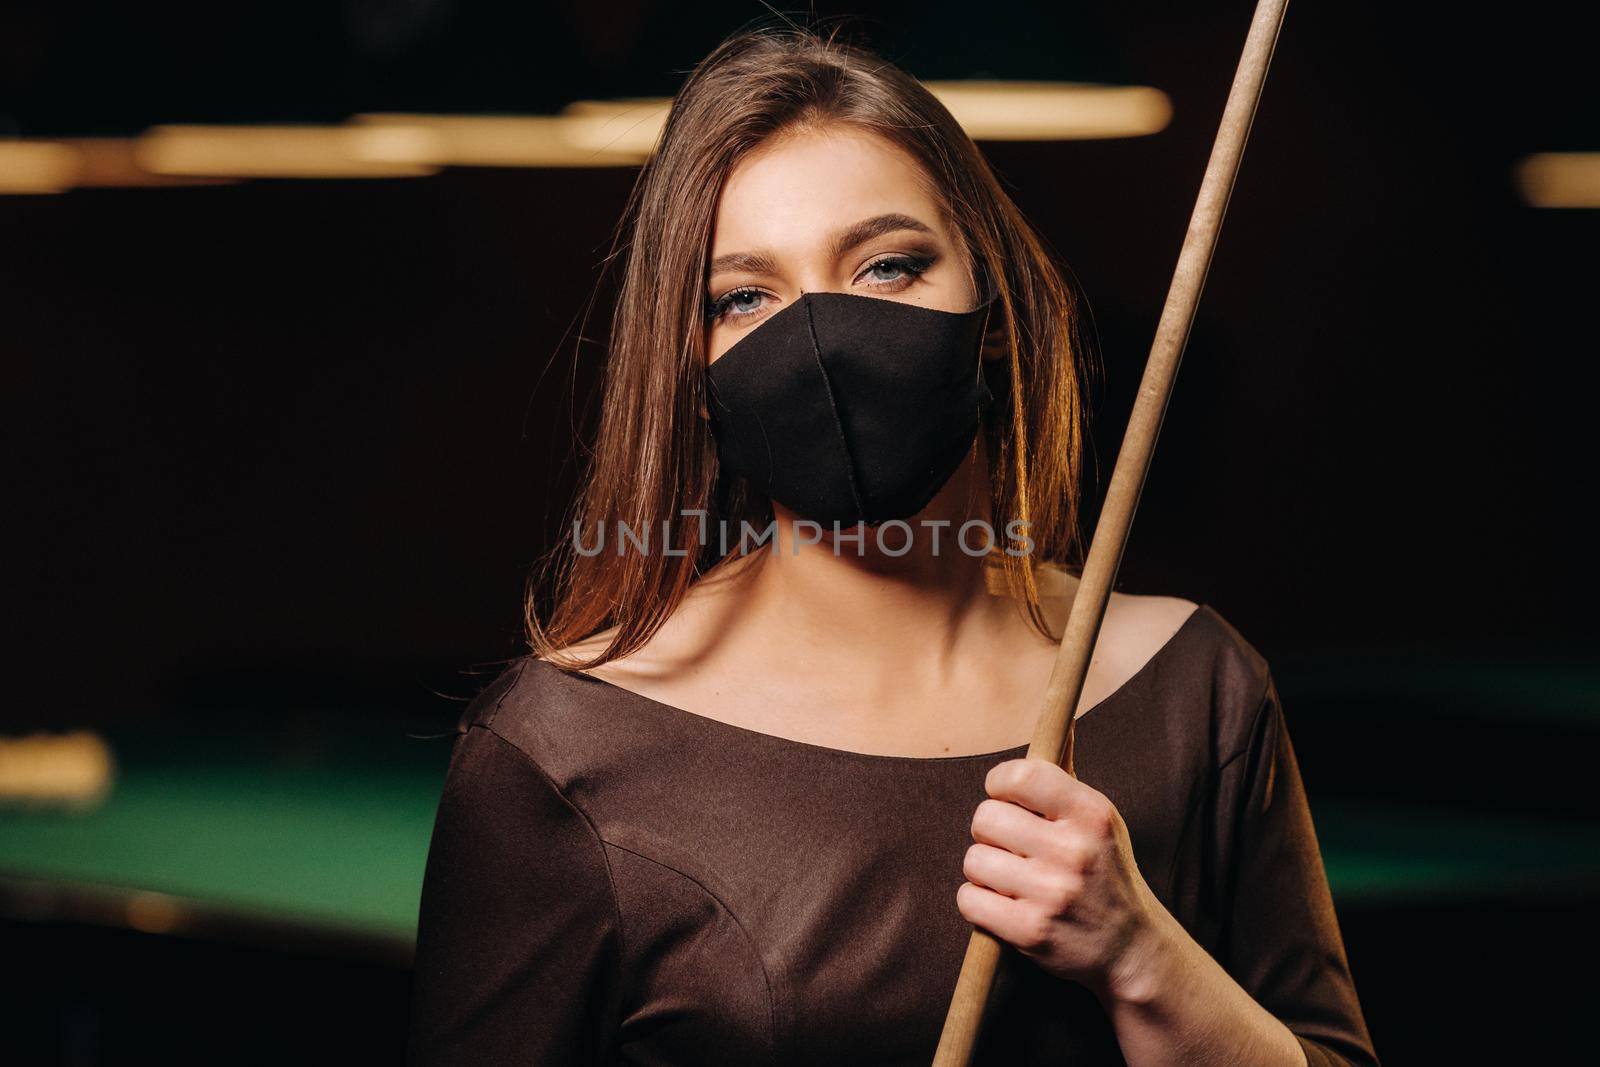 Masked girl in a pool club with a cue in her hands by Lobachad